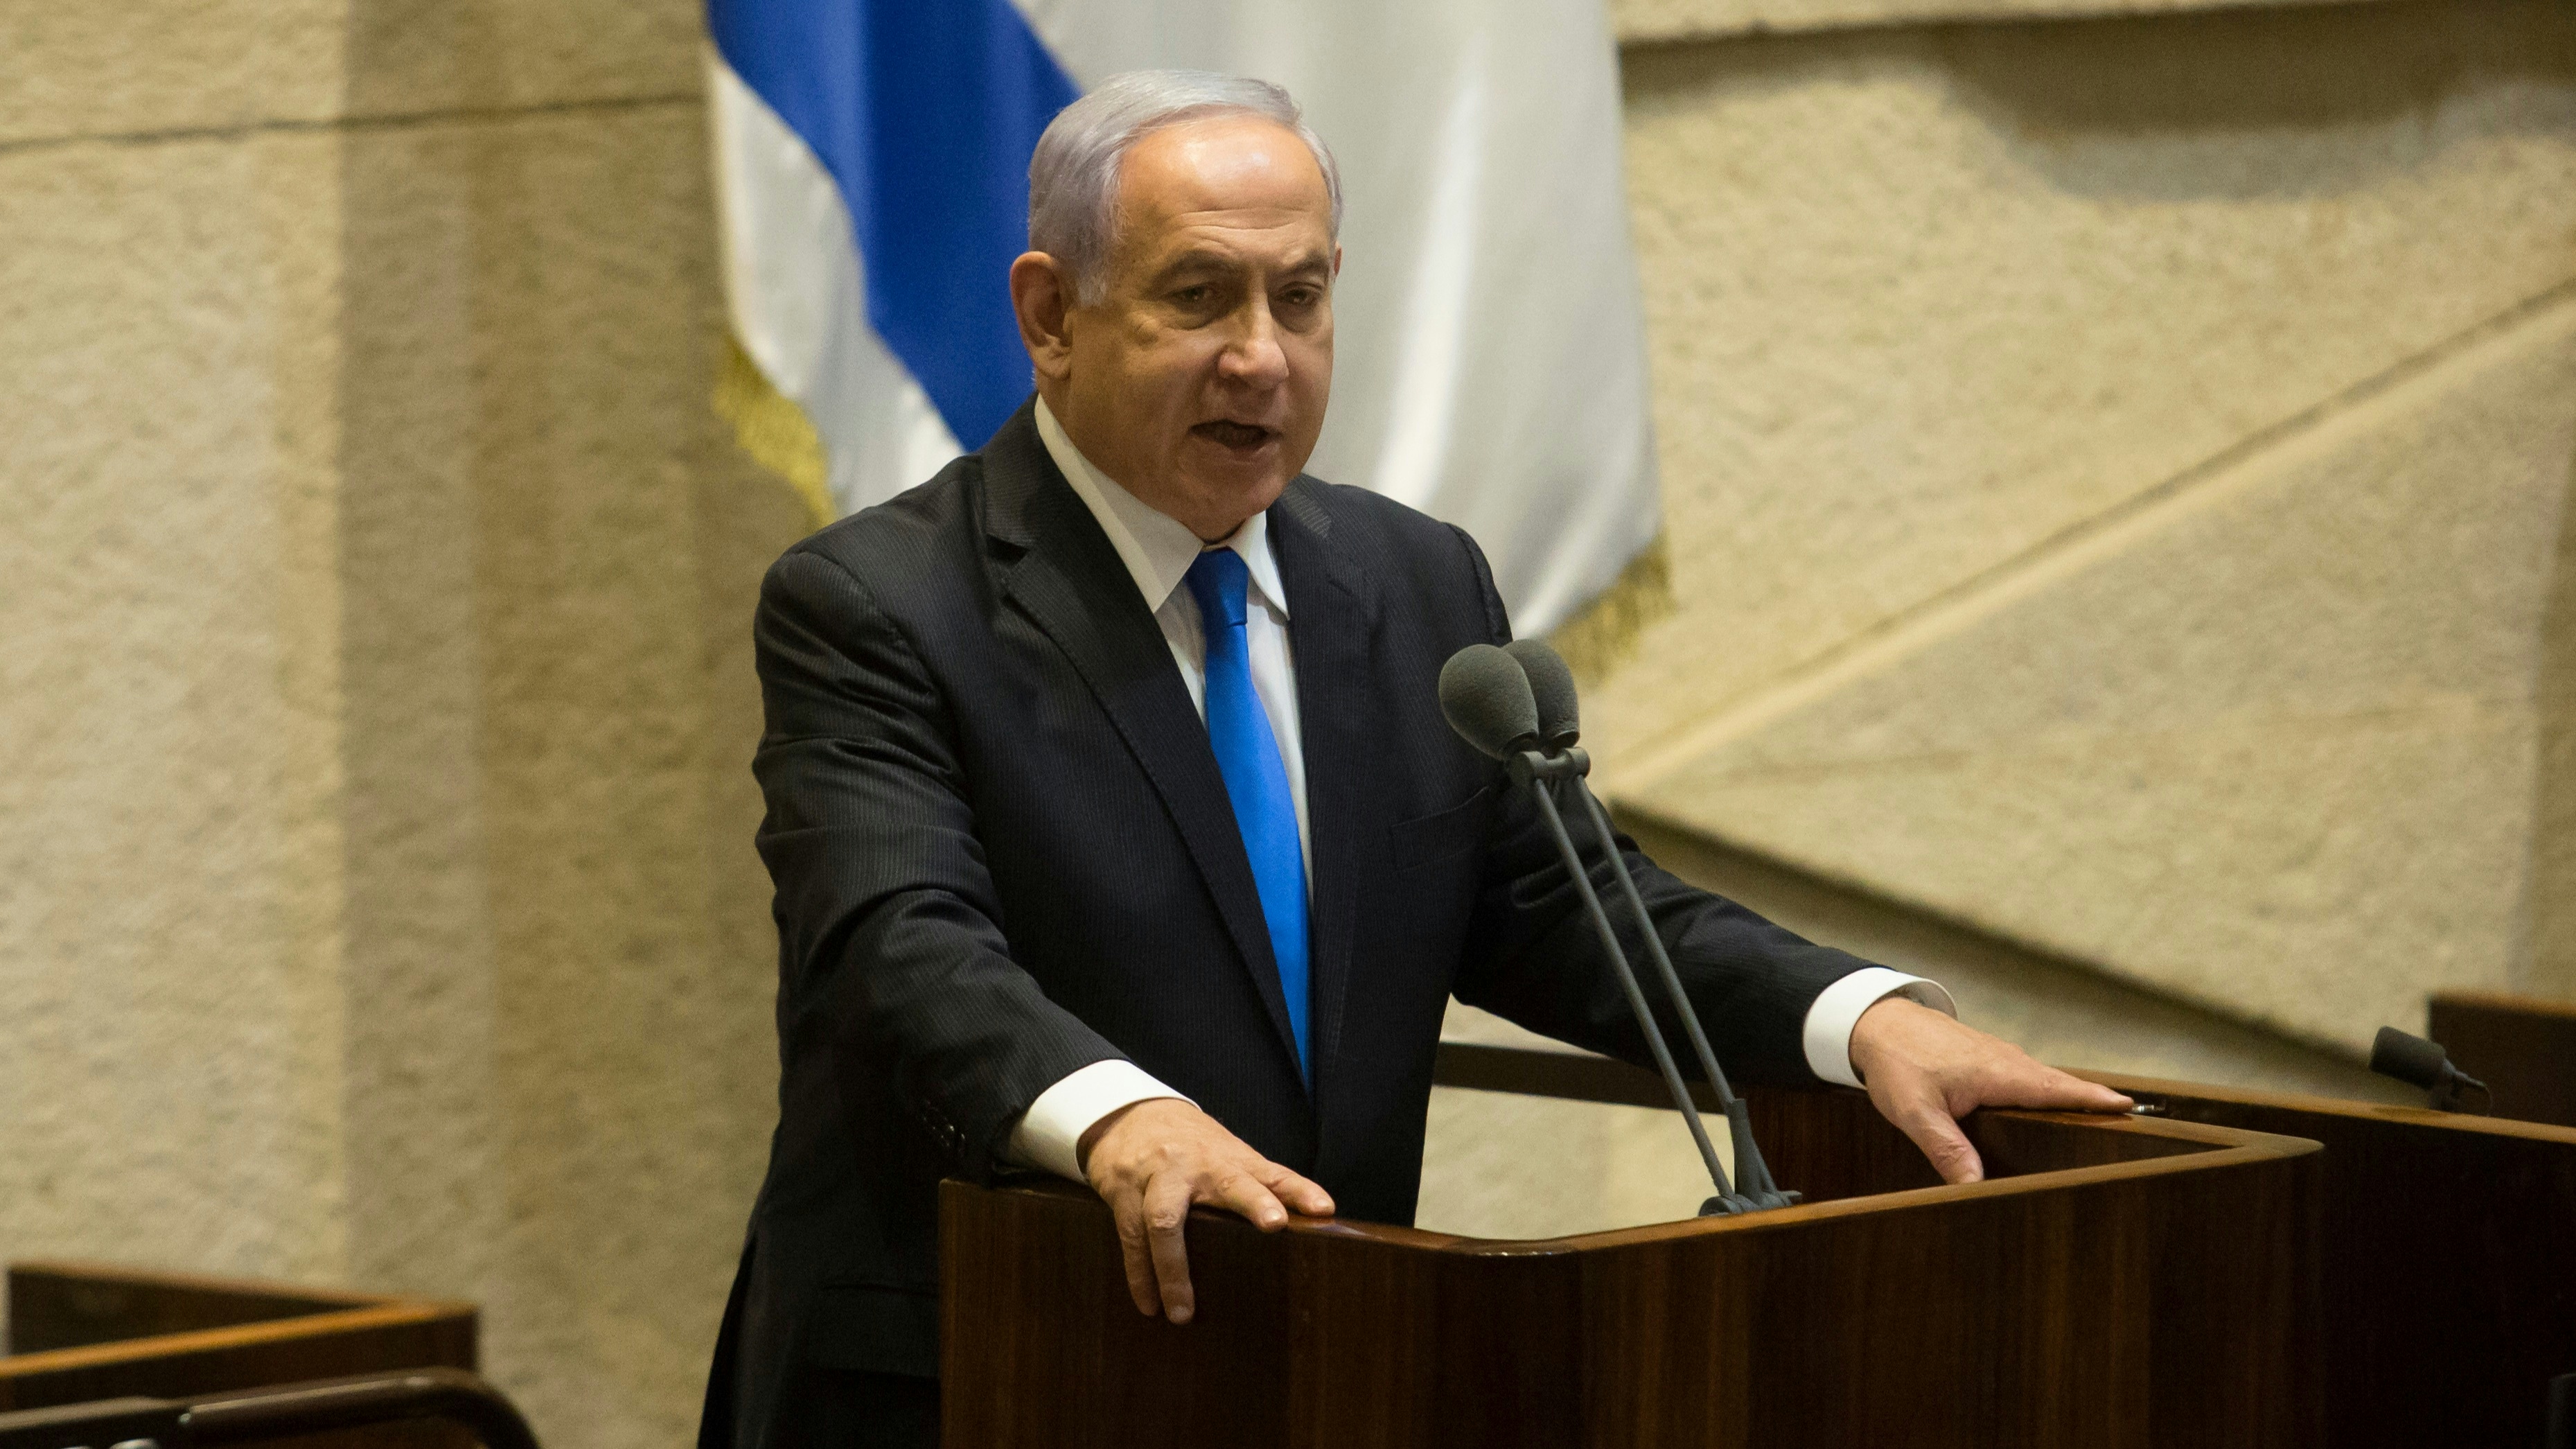 Israeli Prime Minister Benjamin Netanyahu speaks before parliament votes to approve the new government.